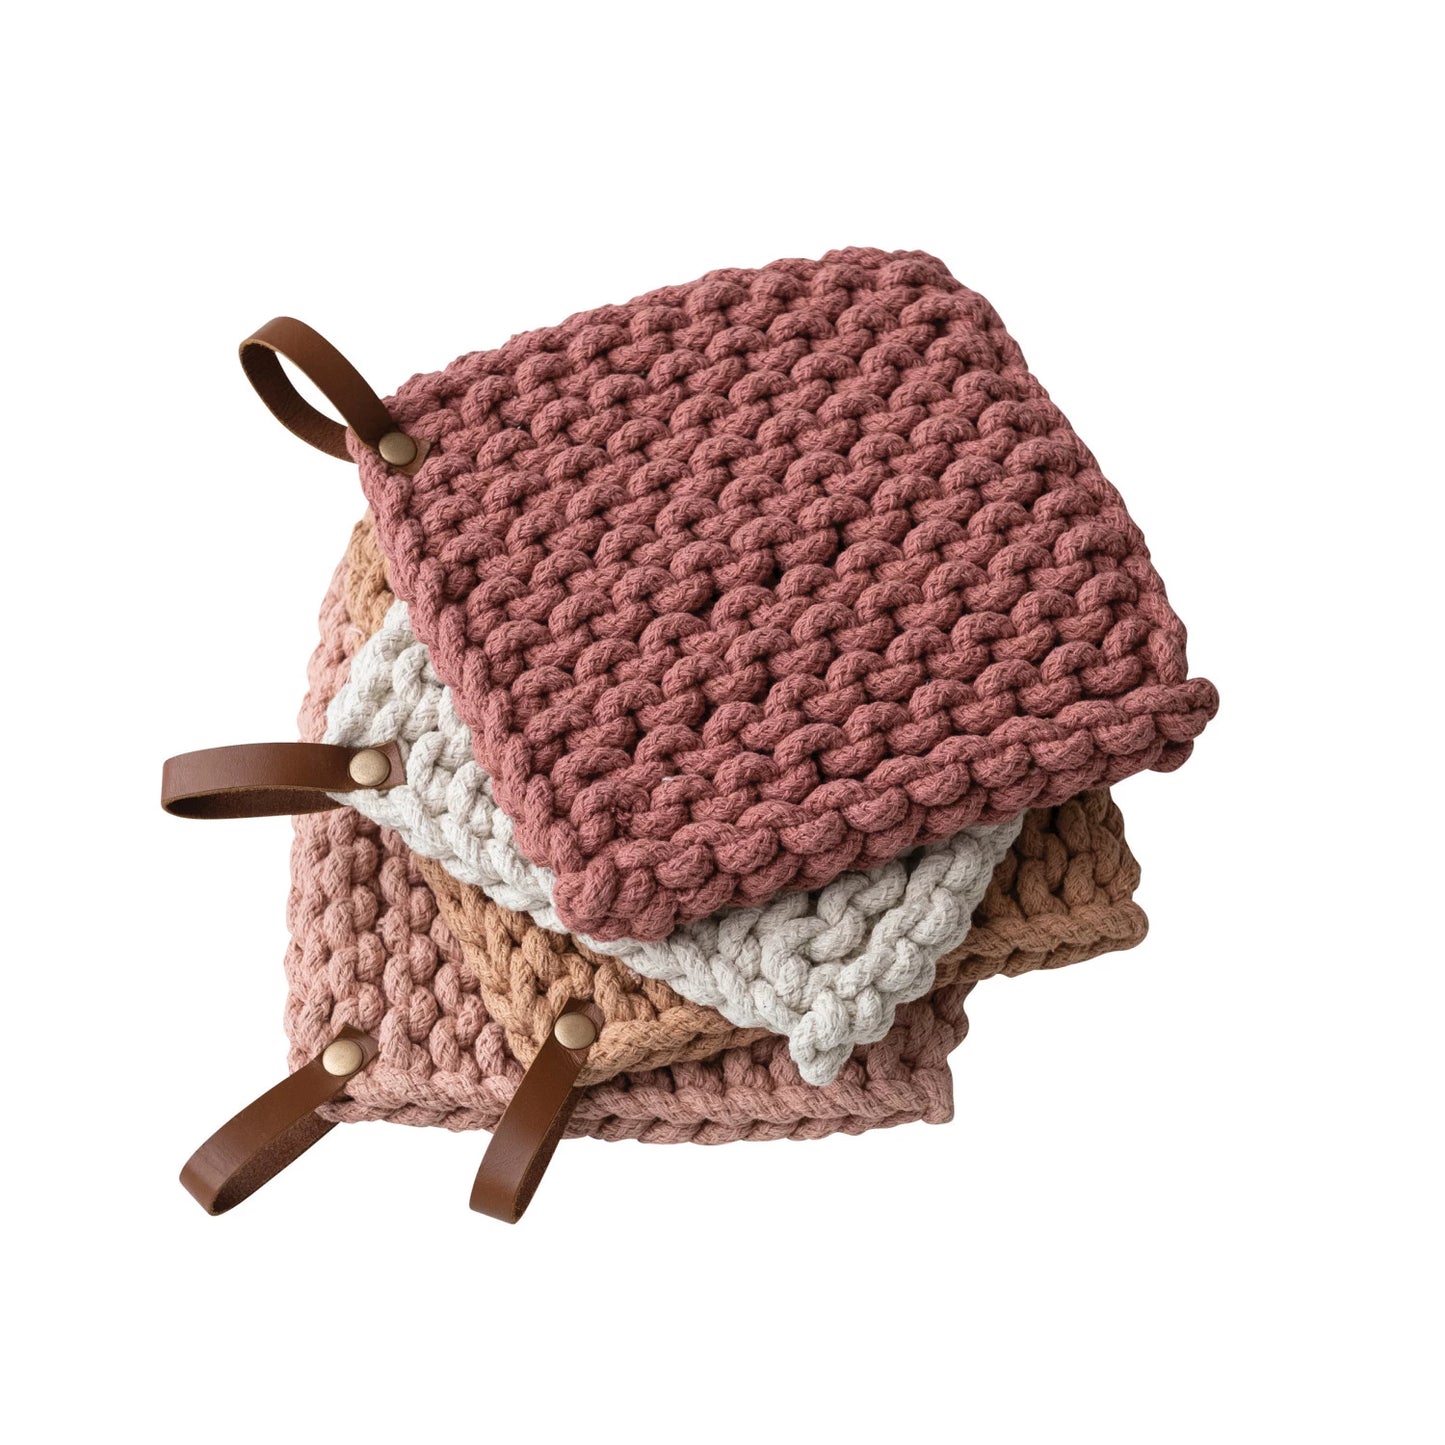 Cotton Crocheted Pot Holder - Leather Loop